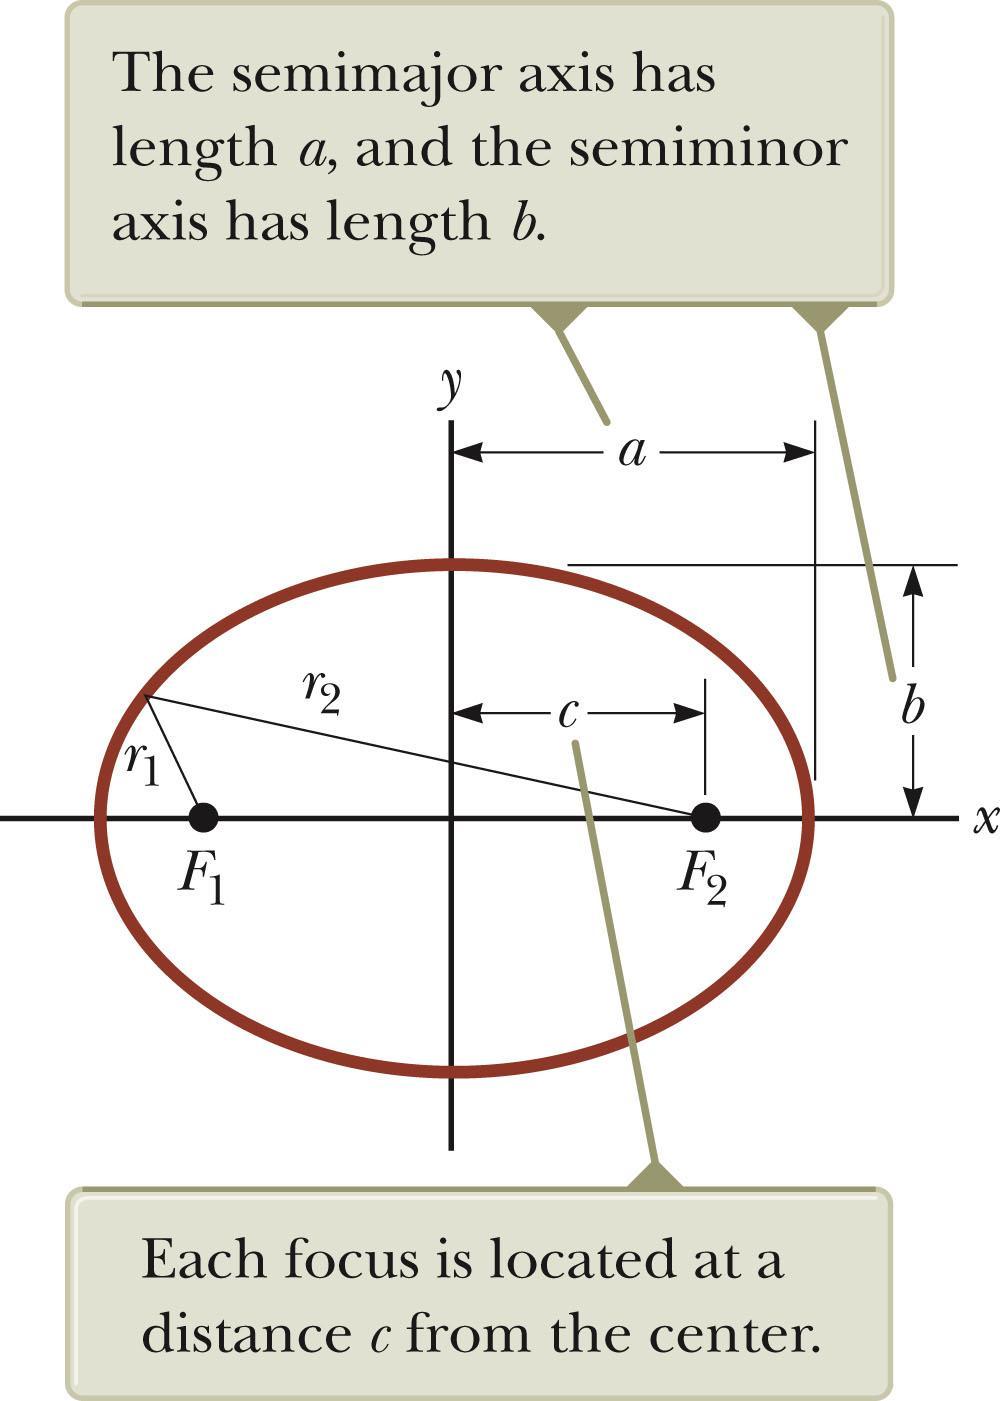 Notes About Ellipses, cont The shortest distance through the center is the minor axis. b is the semi-minor axis.